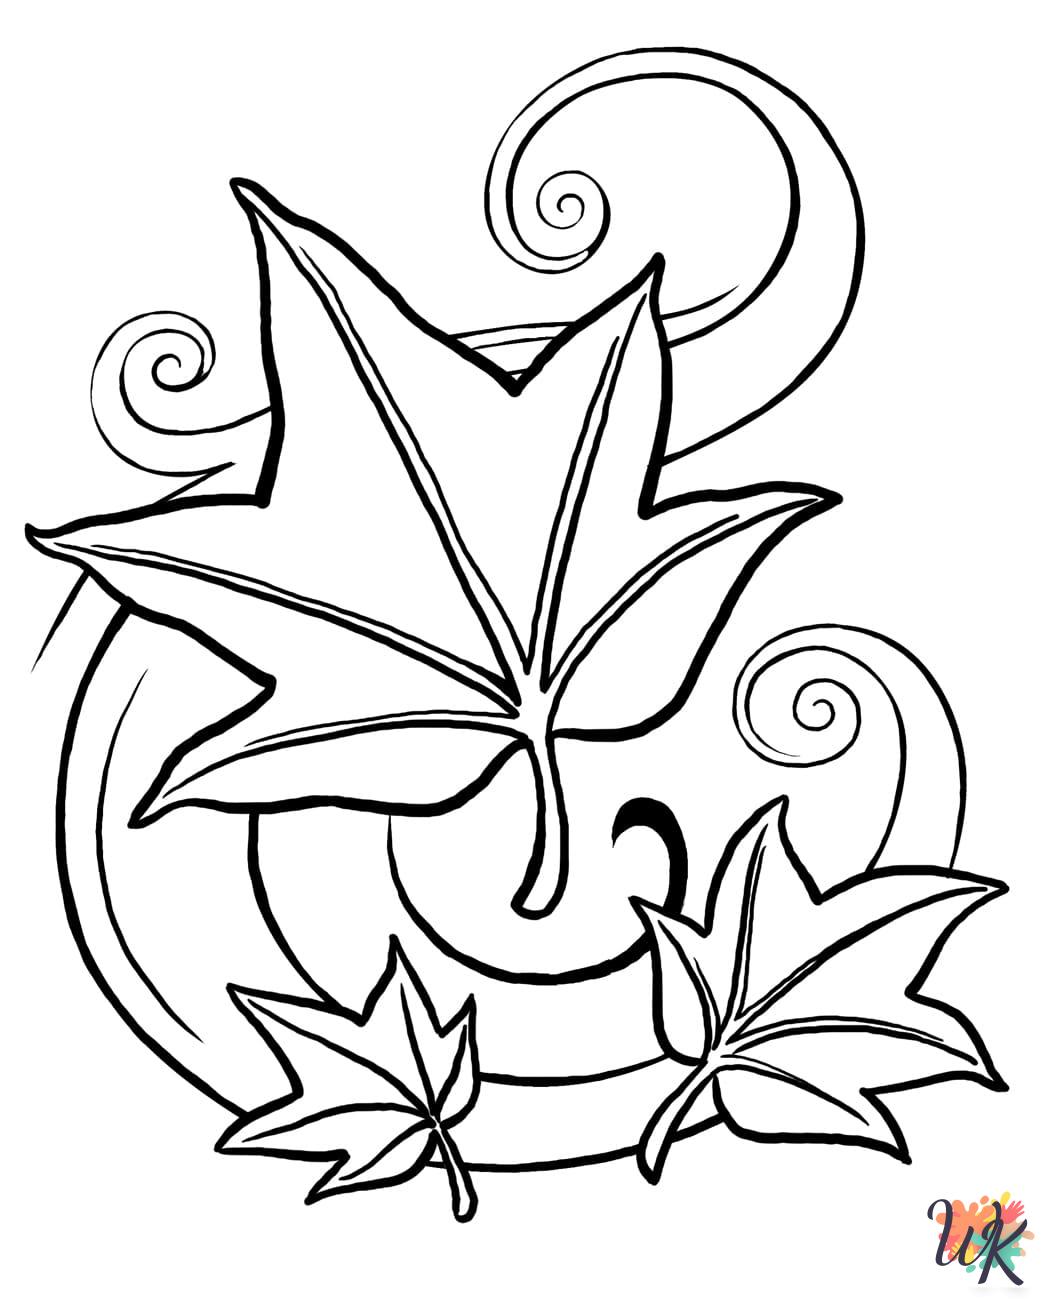 free Fall Leaves coloring pages for adults